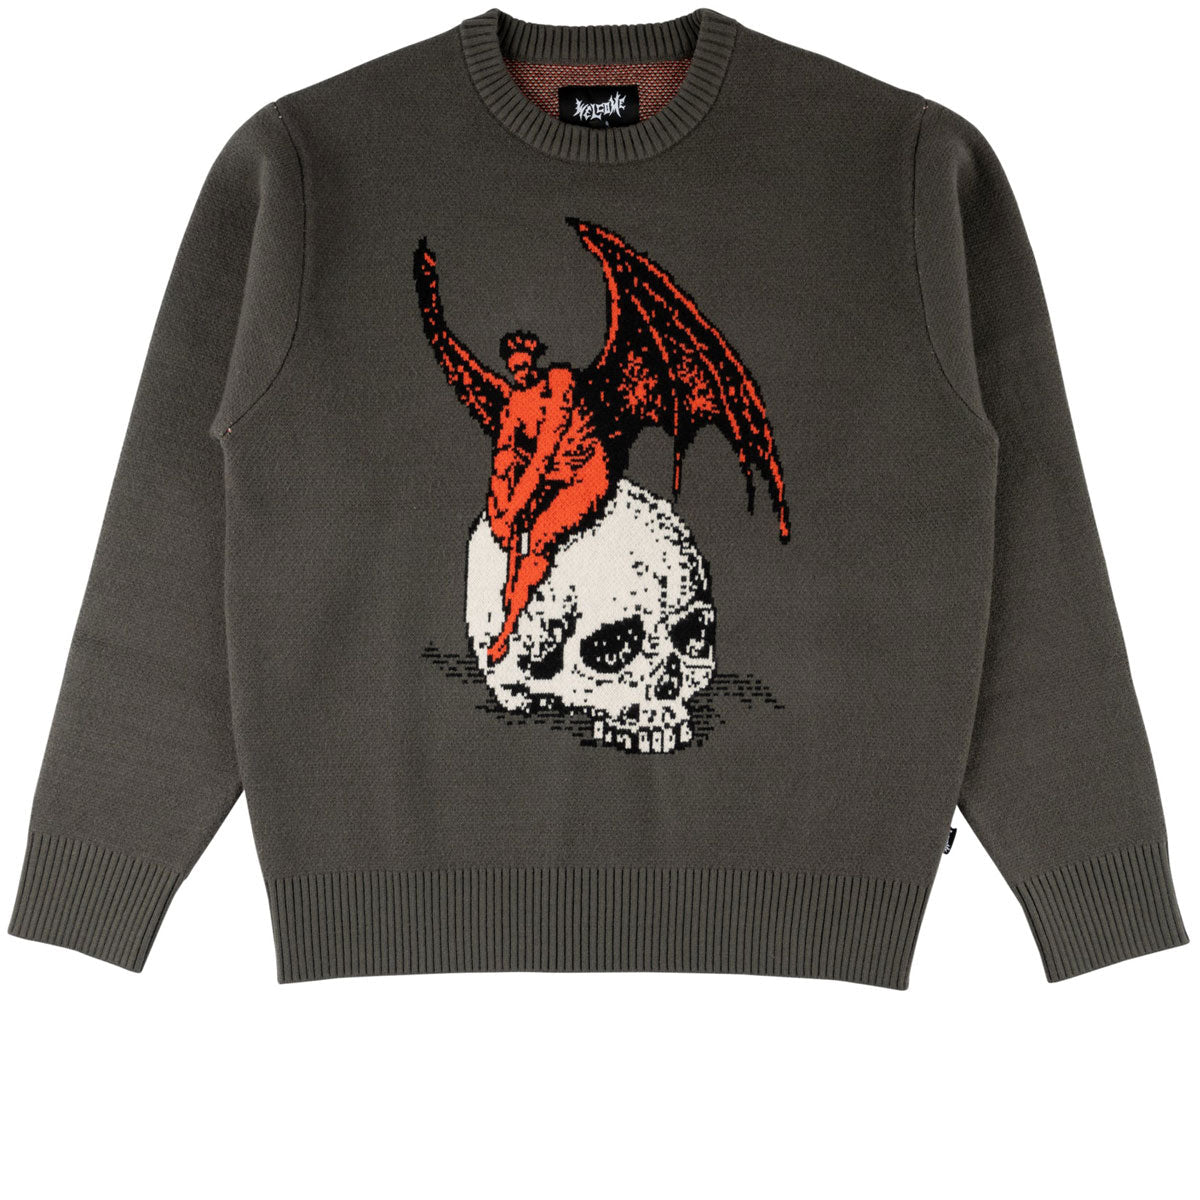 Welcome Nephilim Knit Sweater - Grey image 1